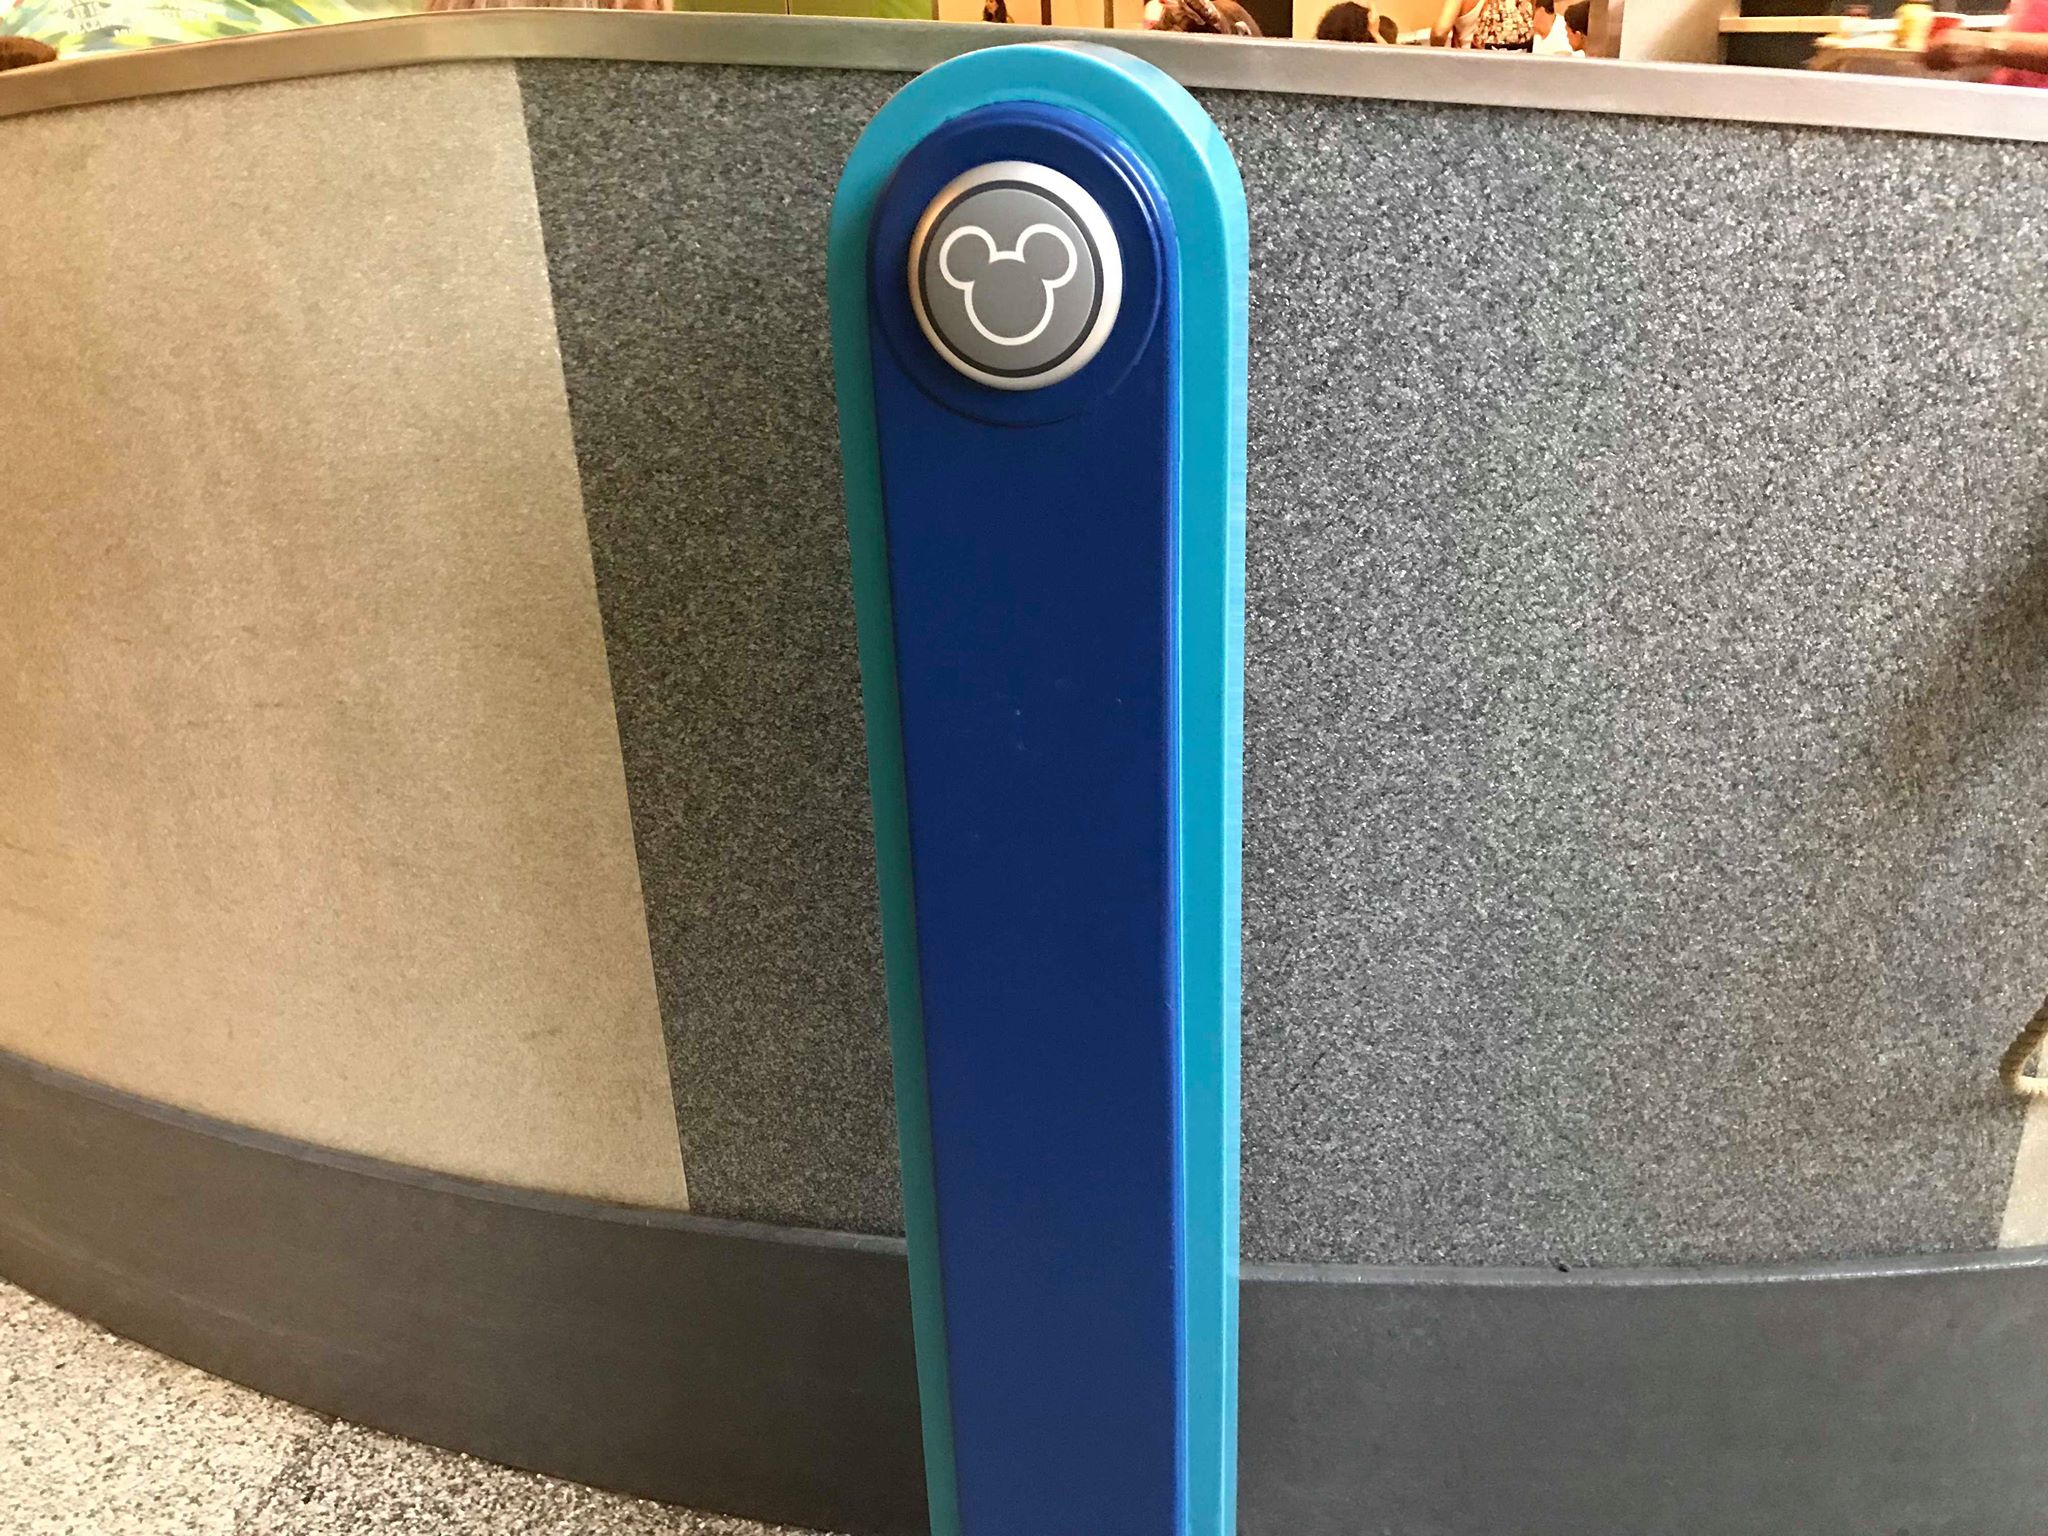 New MagicBand Touch Points Installed at Epcot Attractions